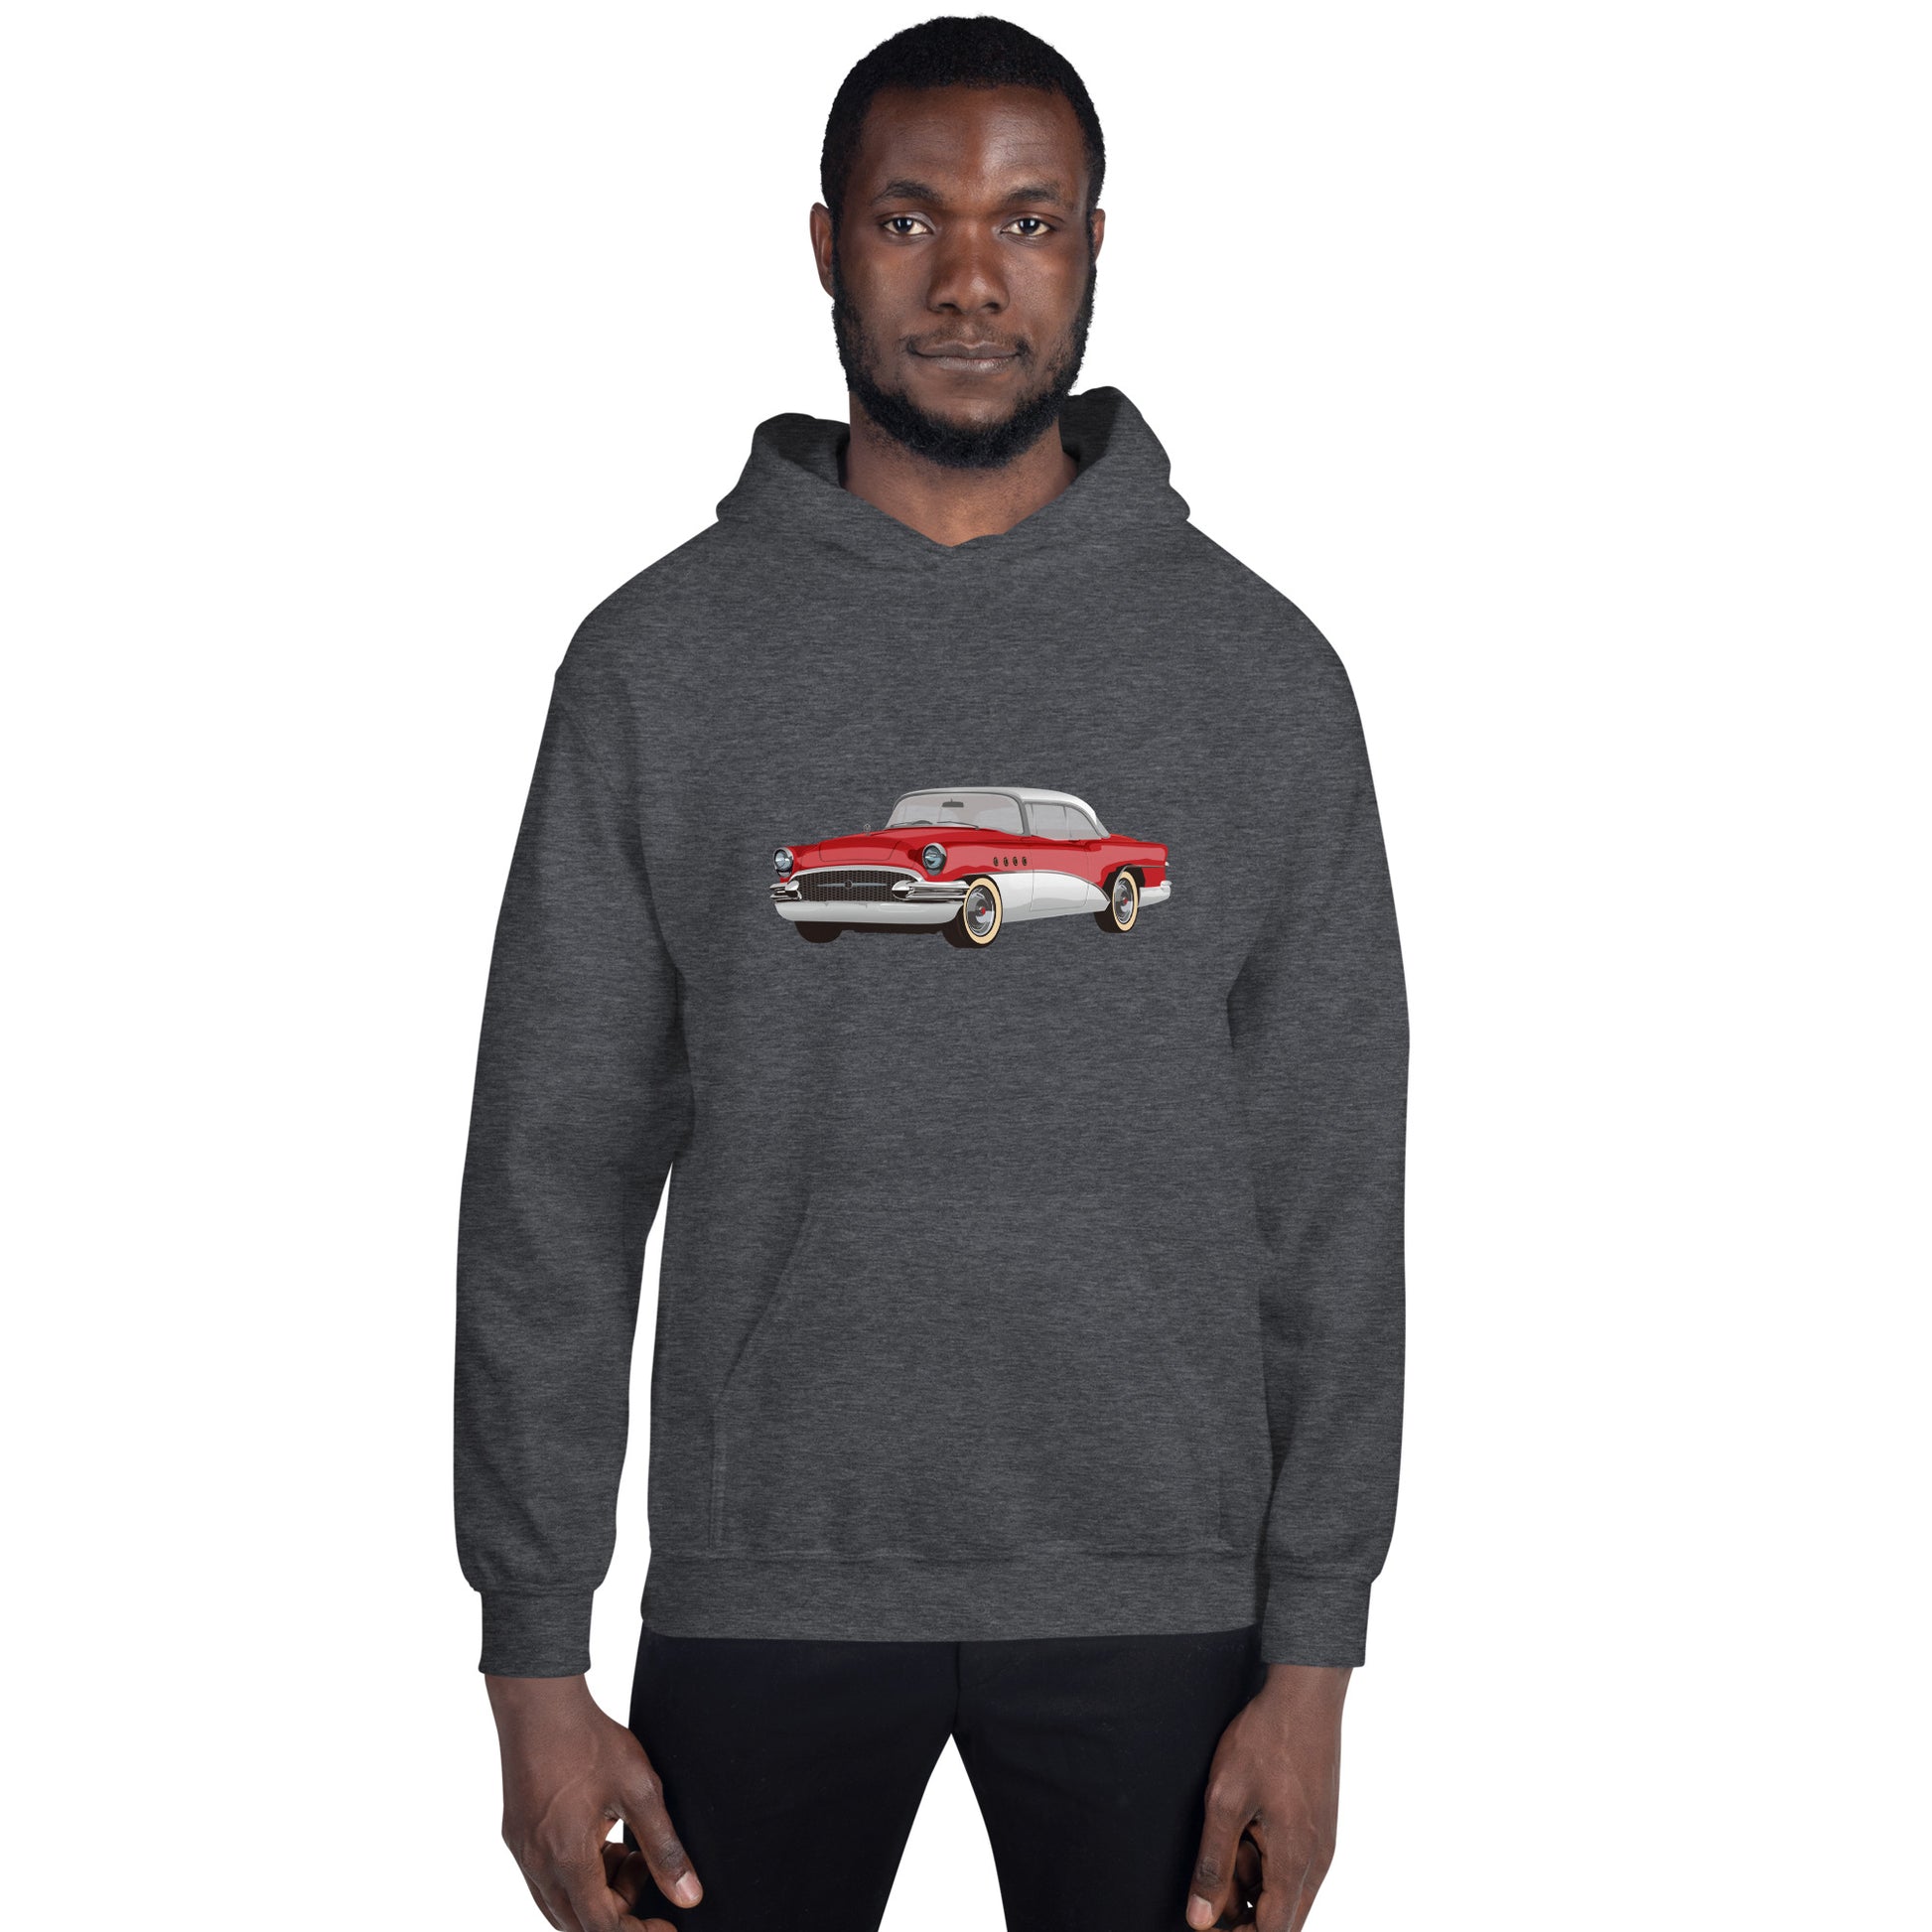 Man with dark heather hoodie with red chevrolet